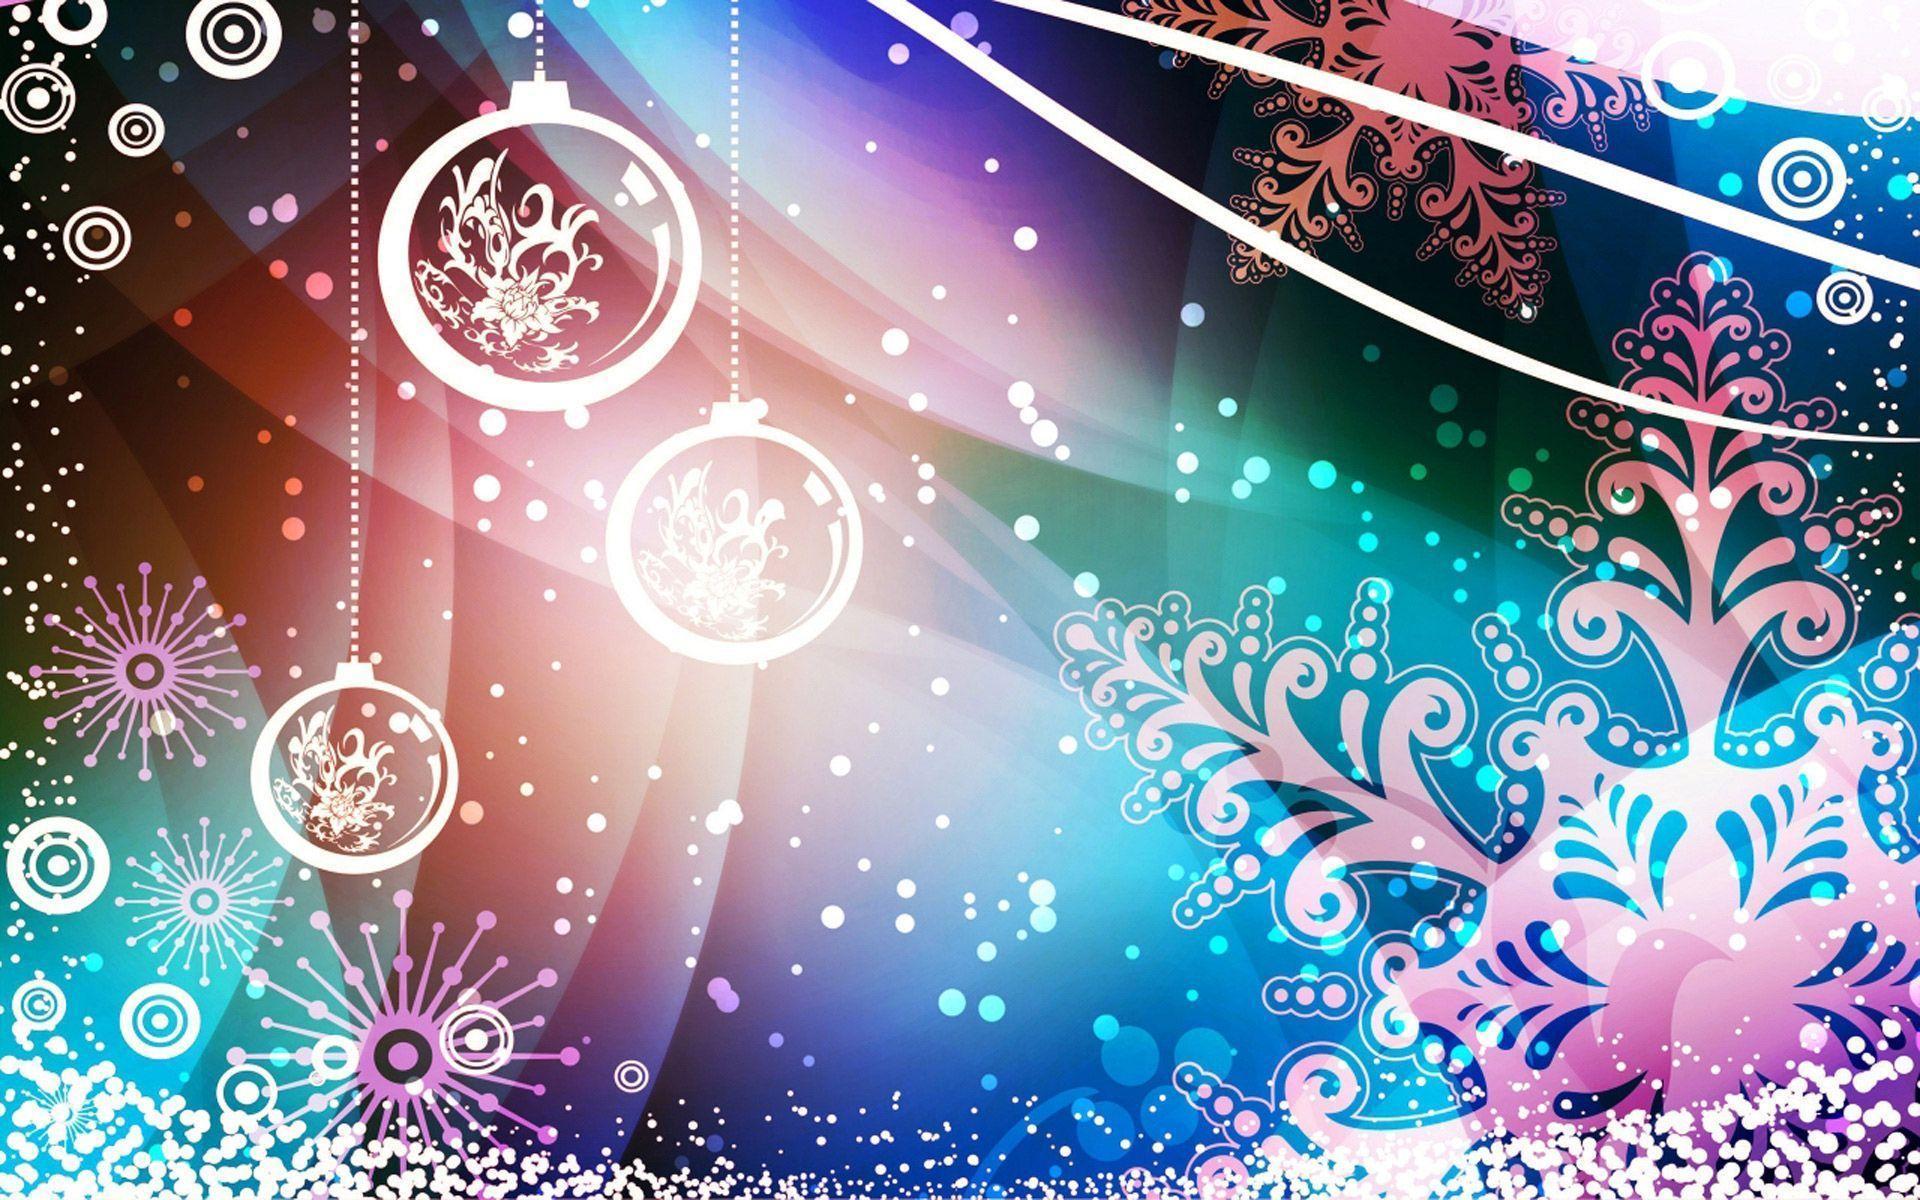 Free Christmas Wallpapers For Computer Backgrounds - Wallpaper Cave